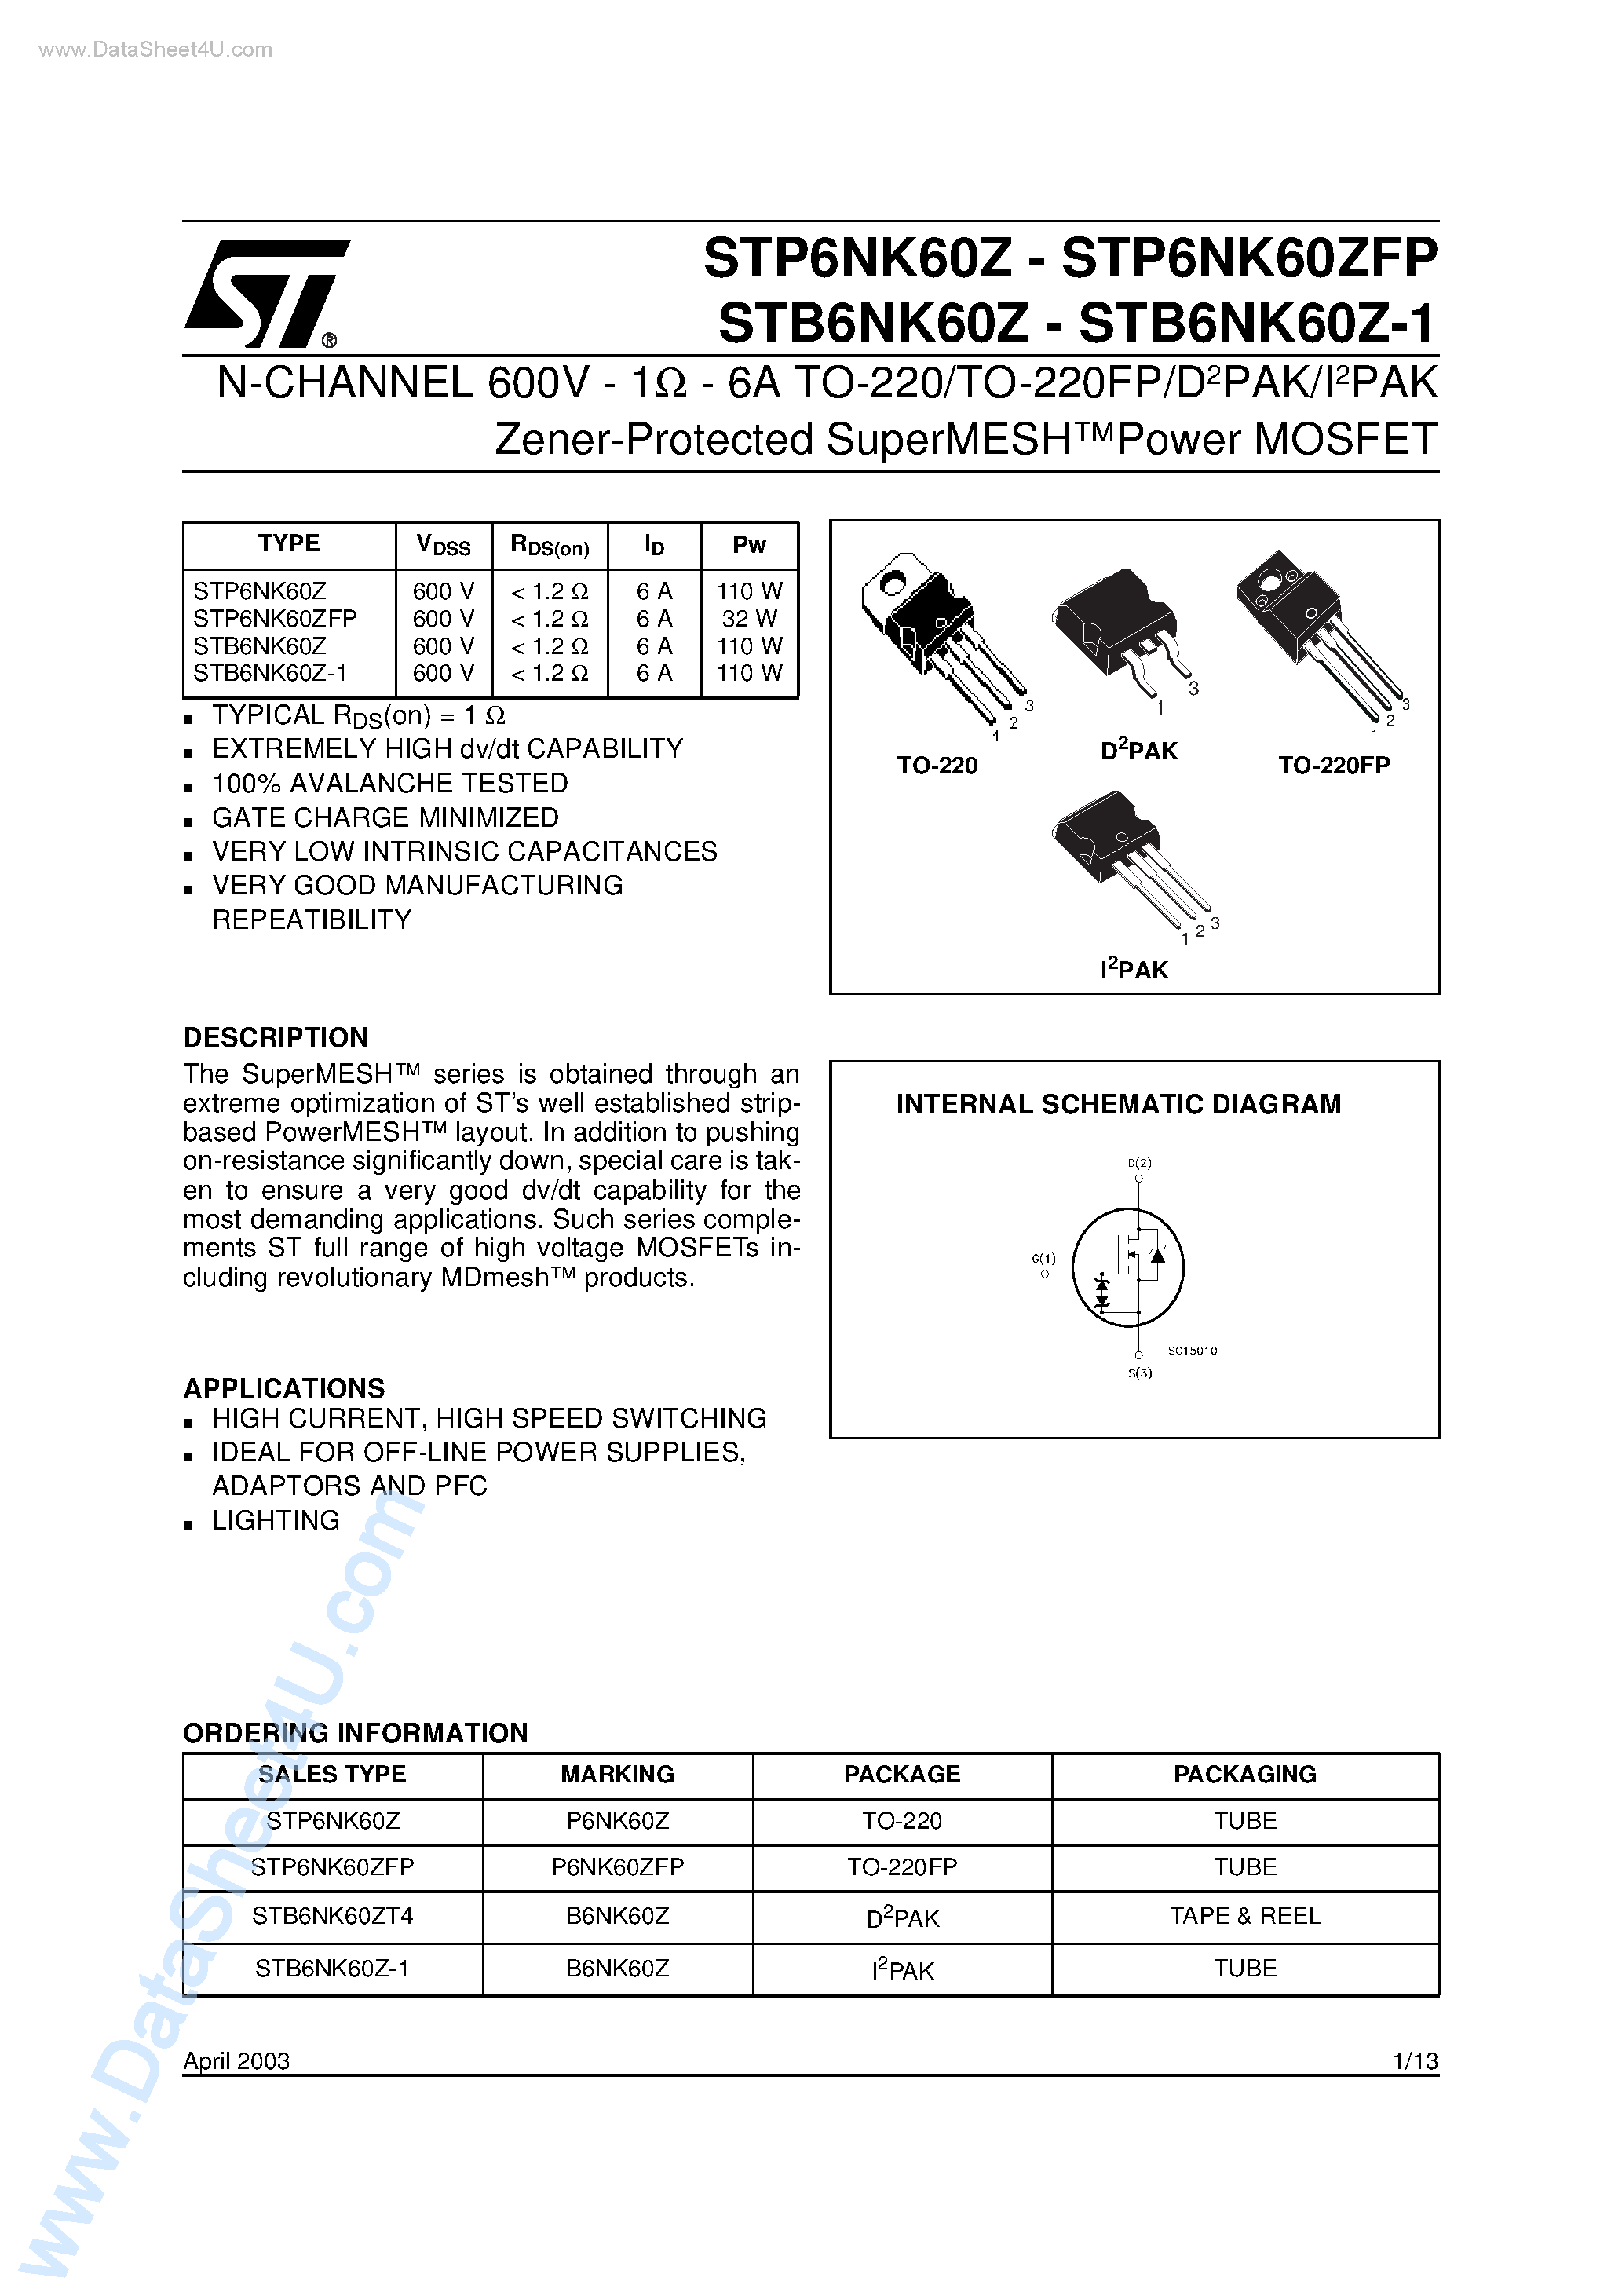 Datasheet STP6NK60Z - N-CHANNEL MOSFET page 1